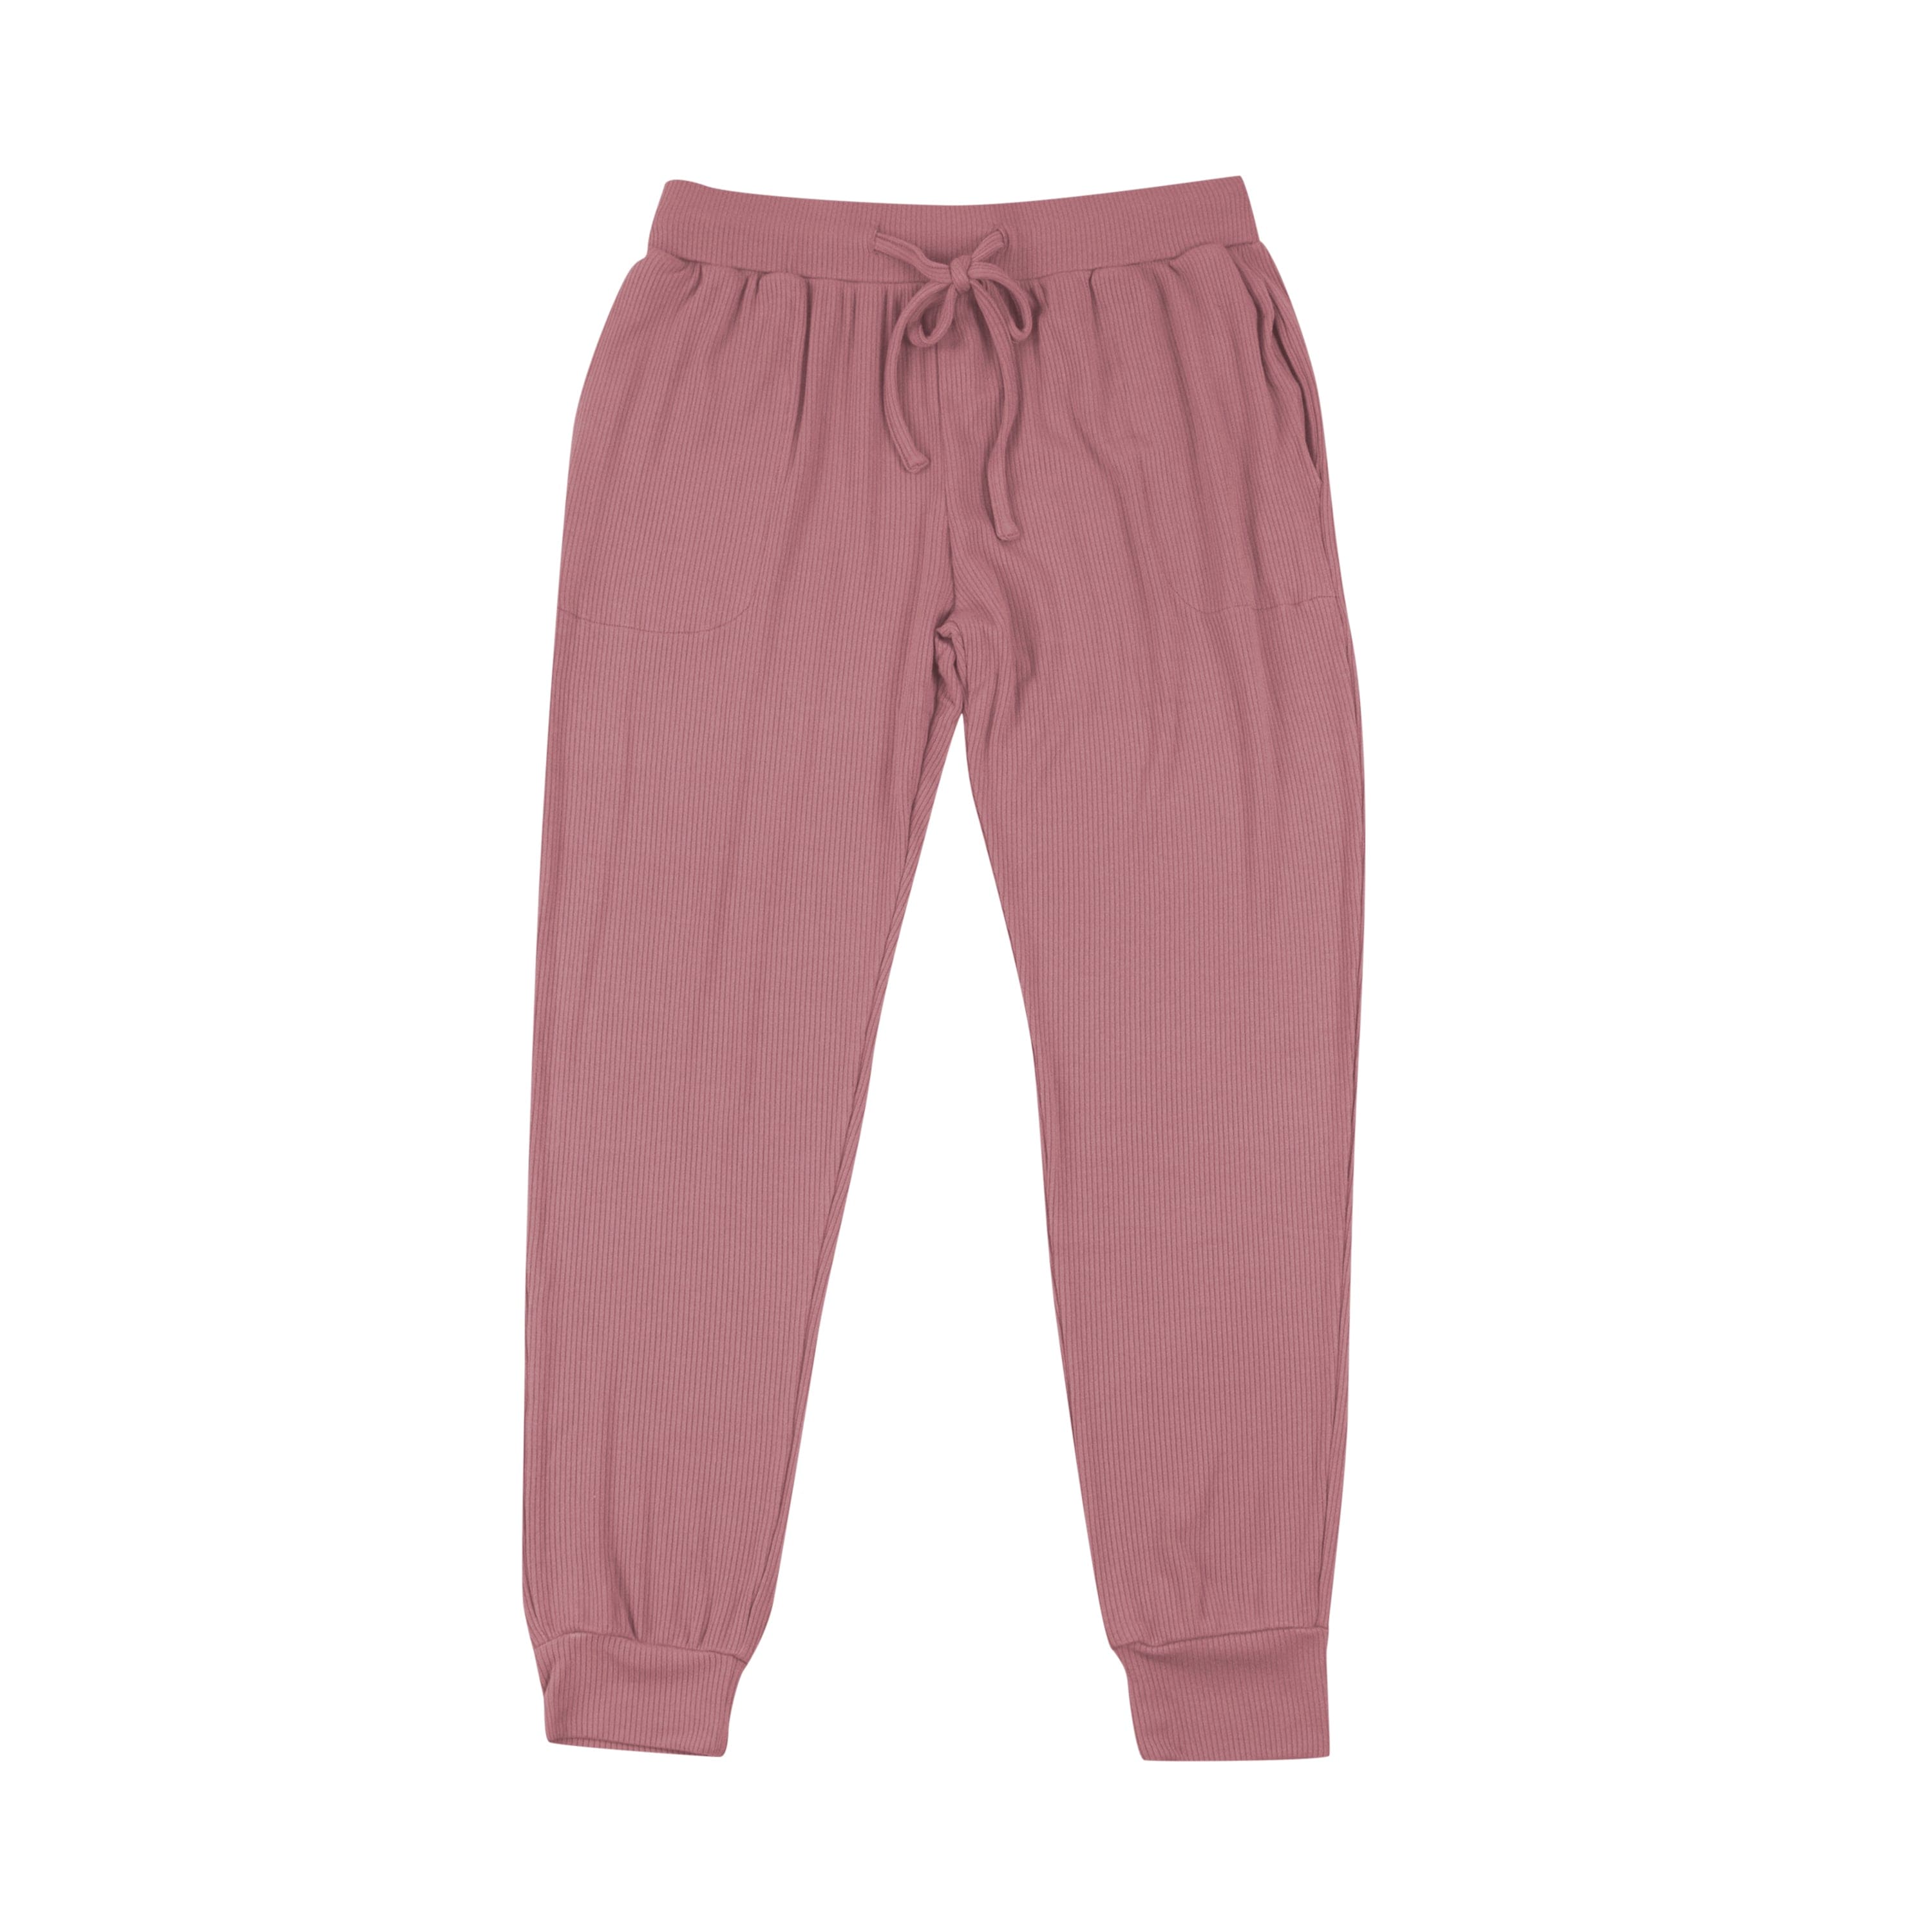 Kyte Baby Women's Ribbed Jogger Pant in Dusty Rose